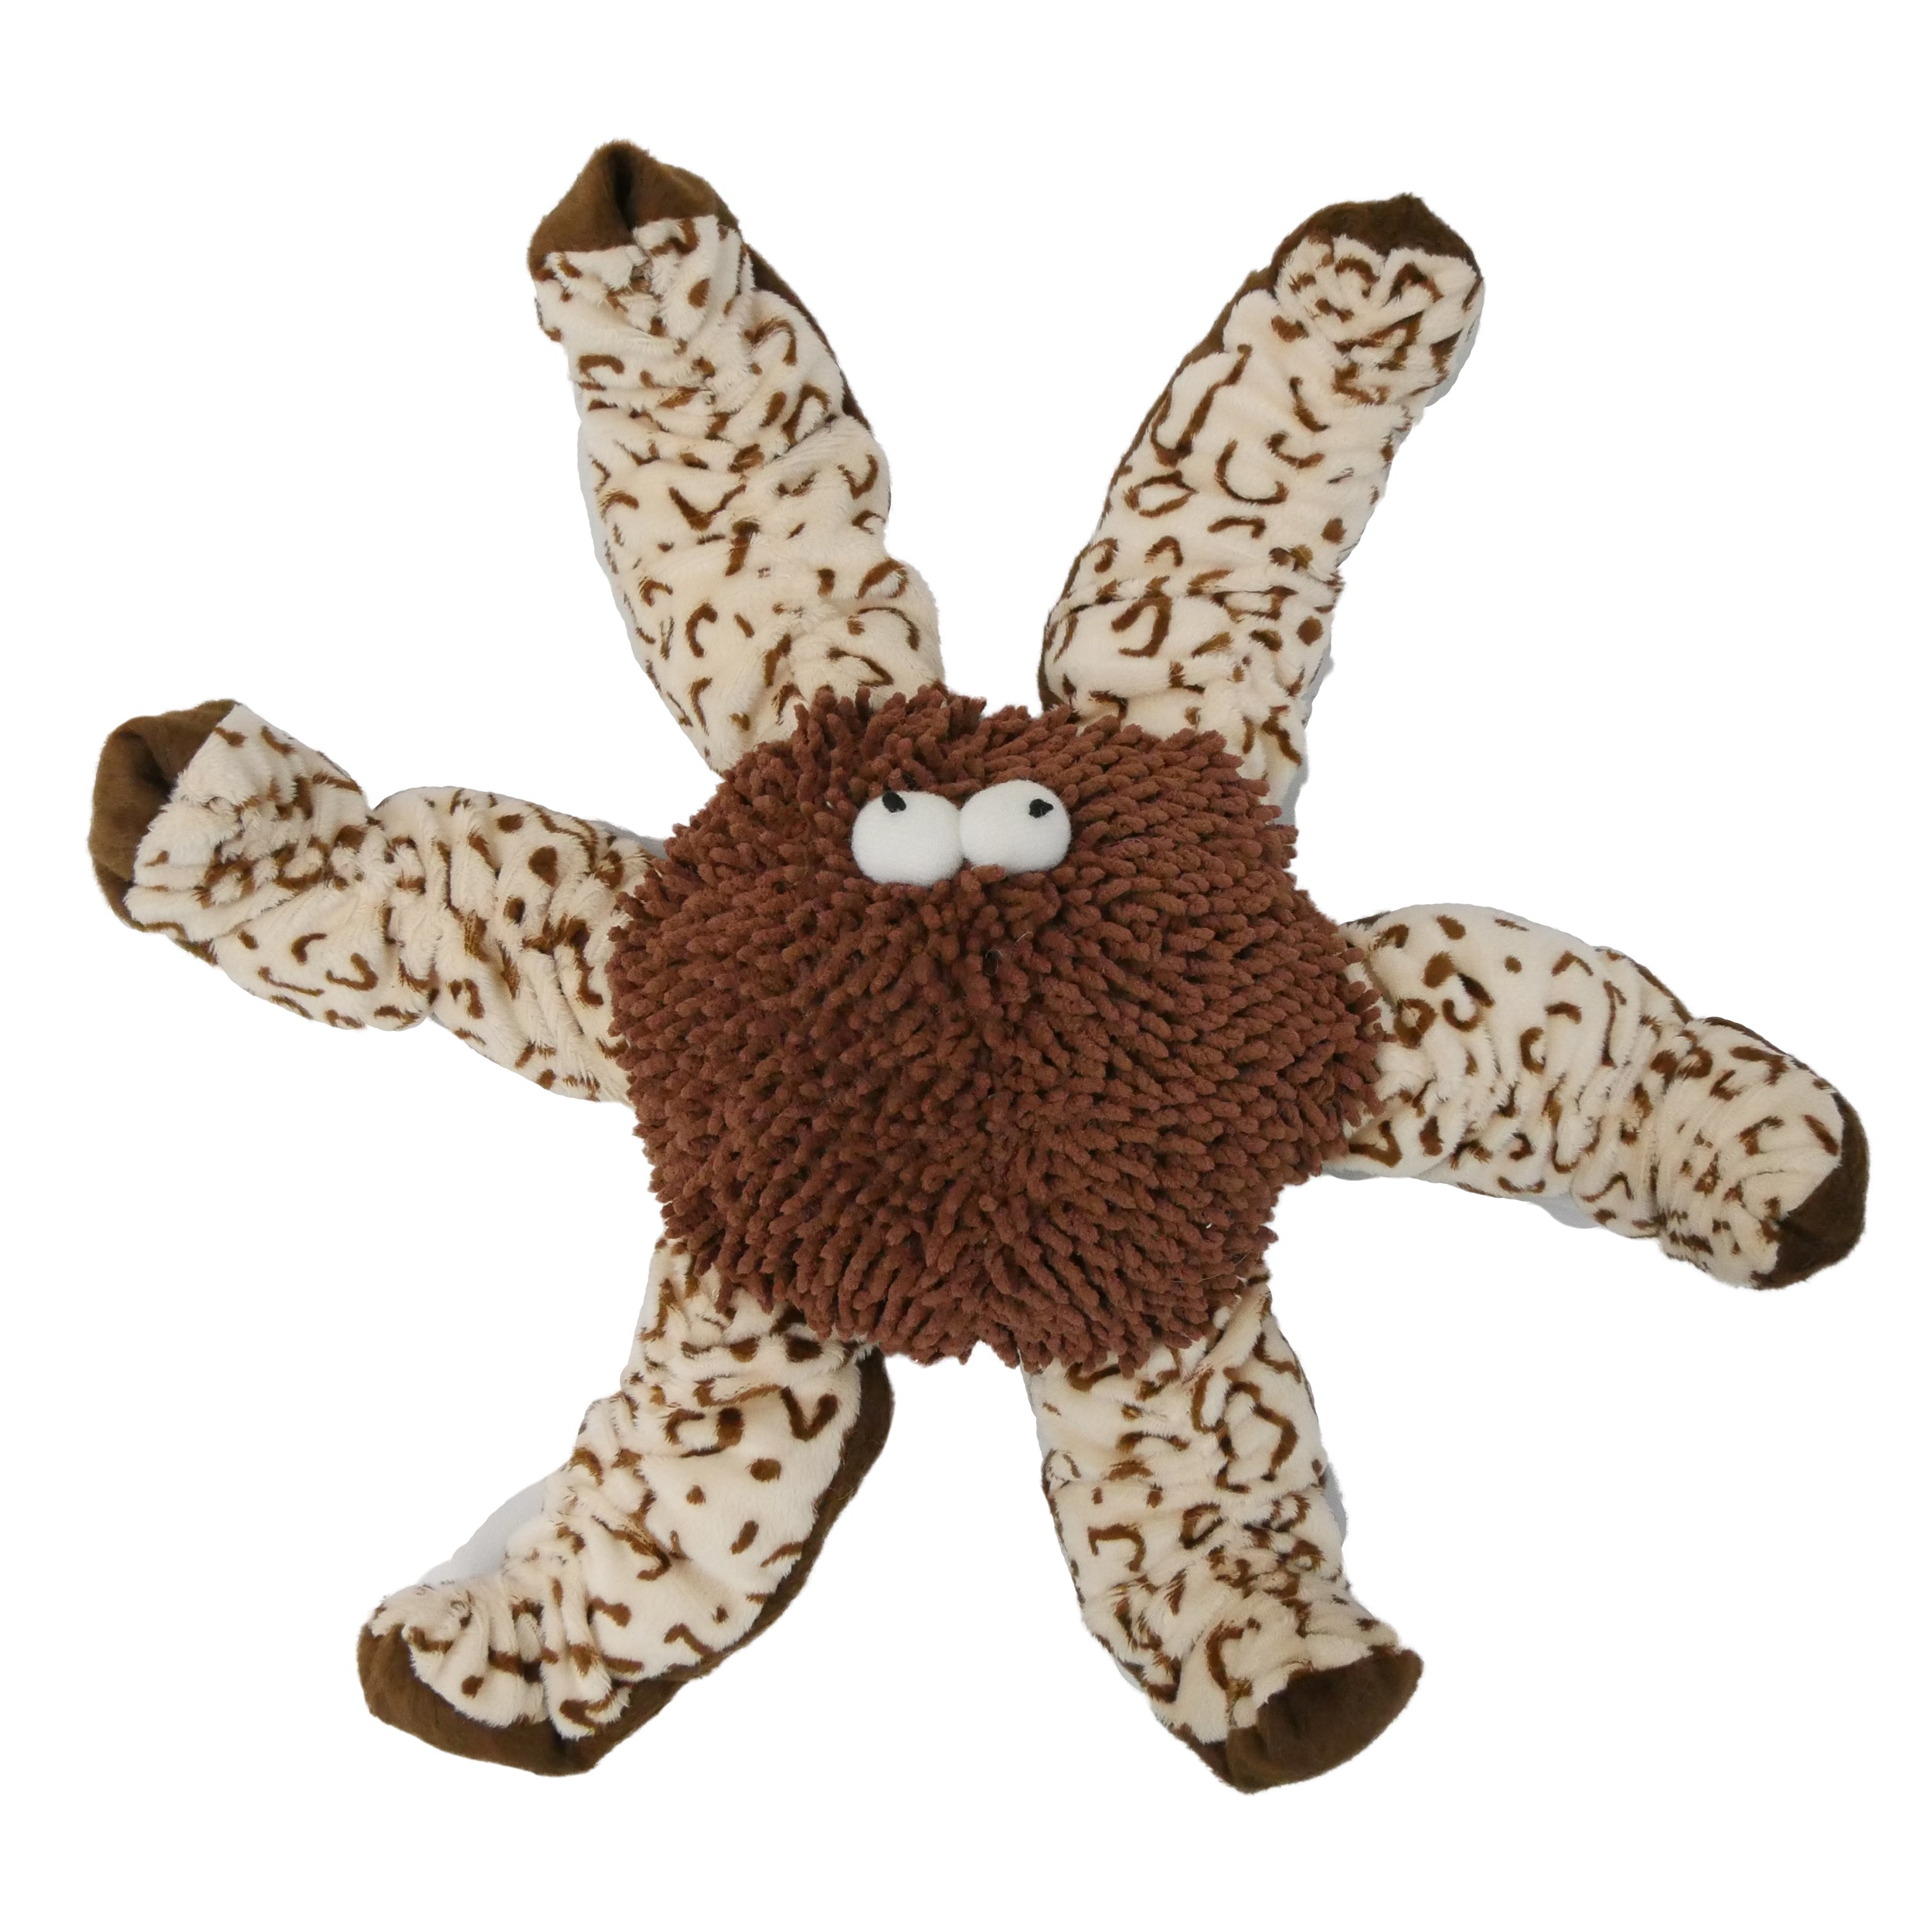 Plush Shaggy Chenille Suede Patterned Octopus with Squeakers Dog Toy 15"